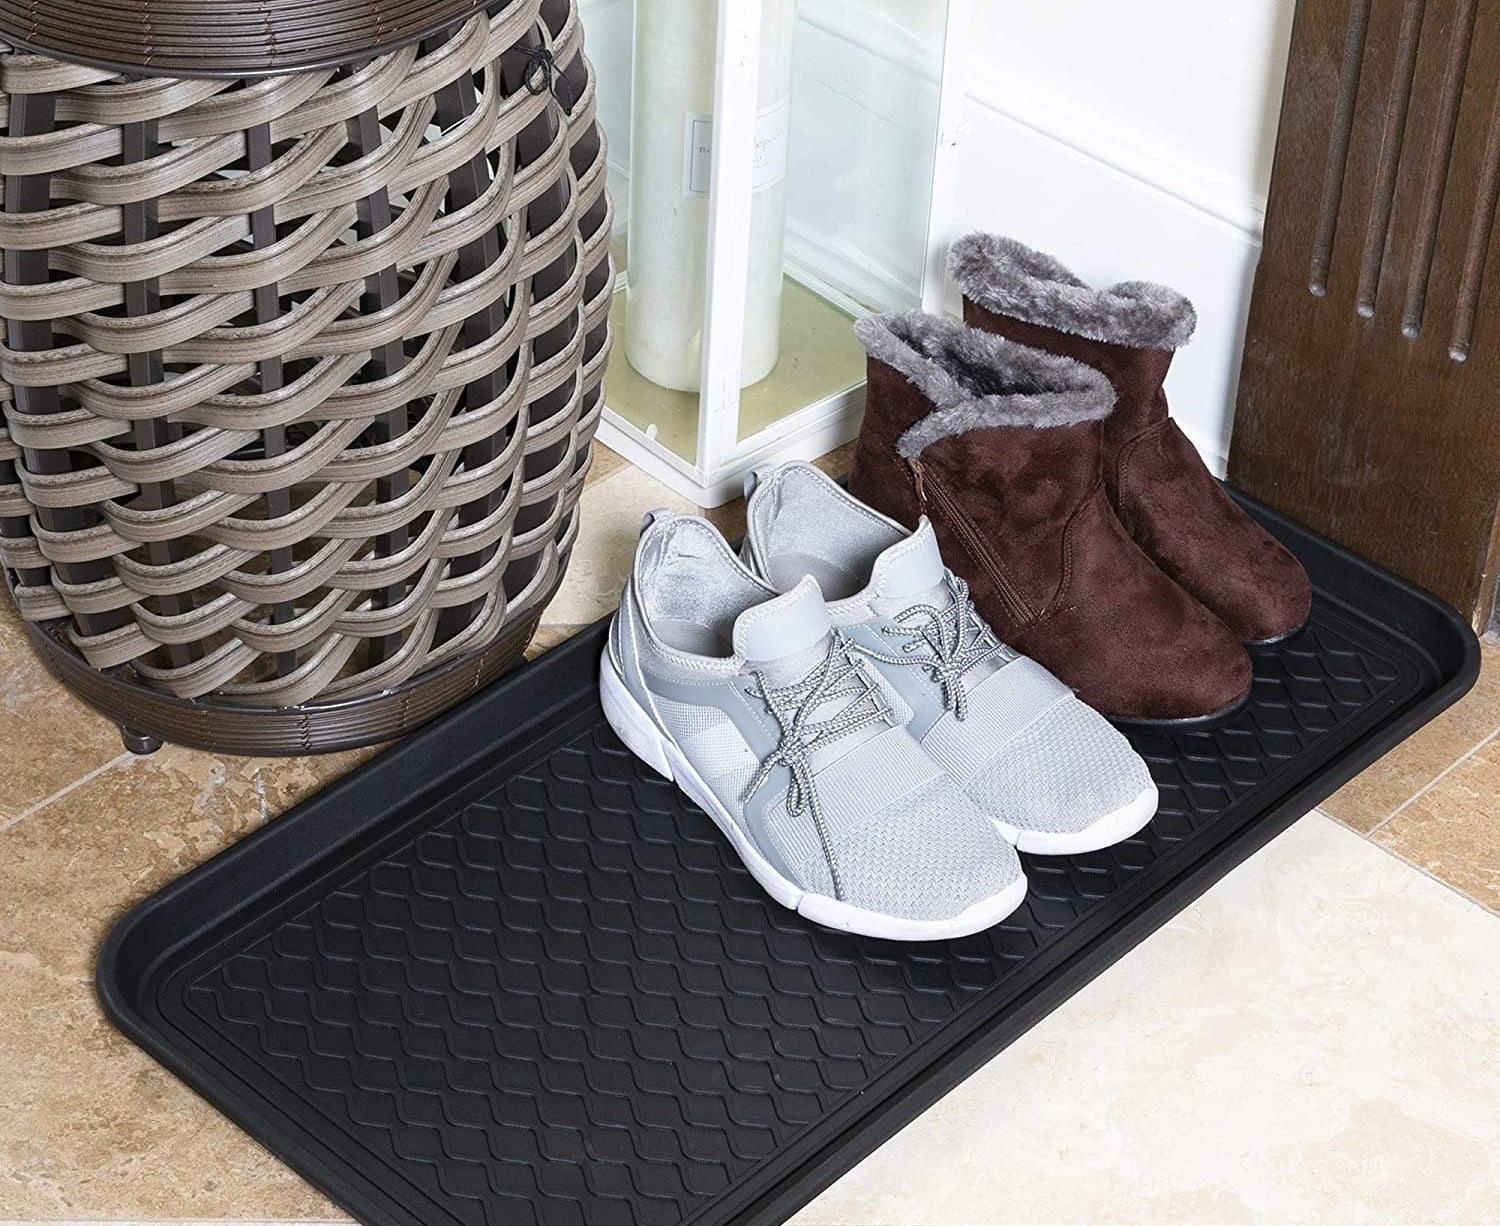 The tray with boots and sneakers on top of it